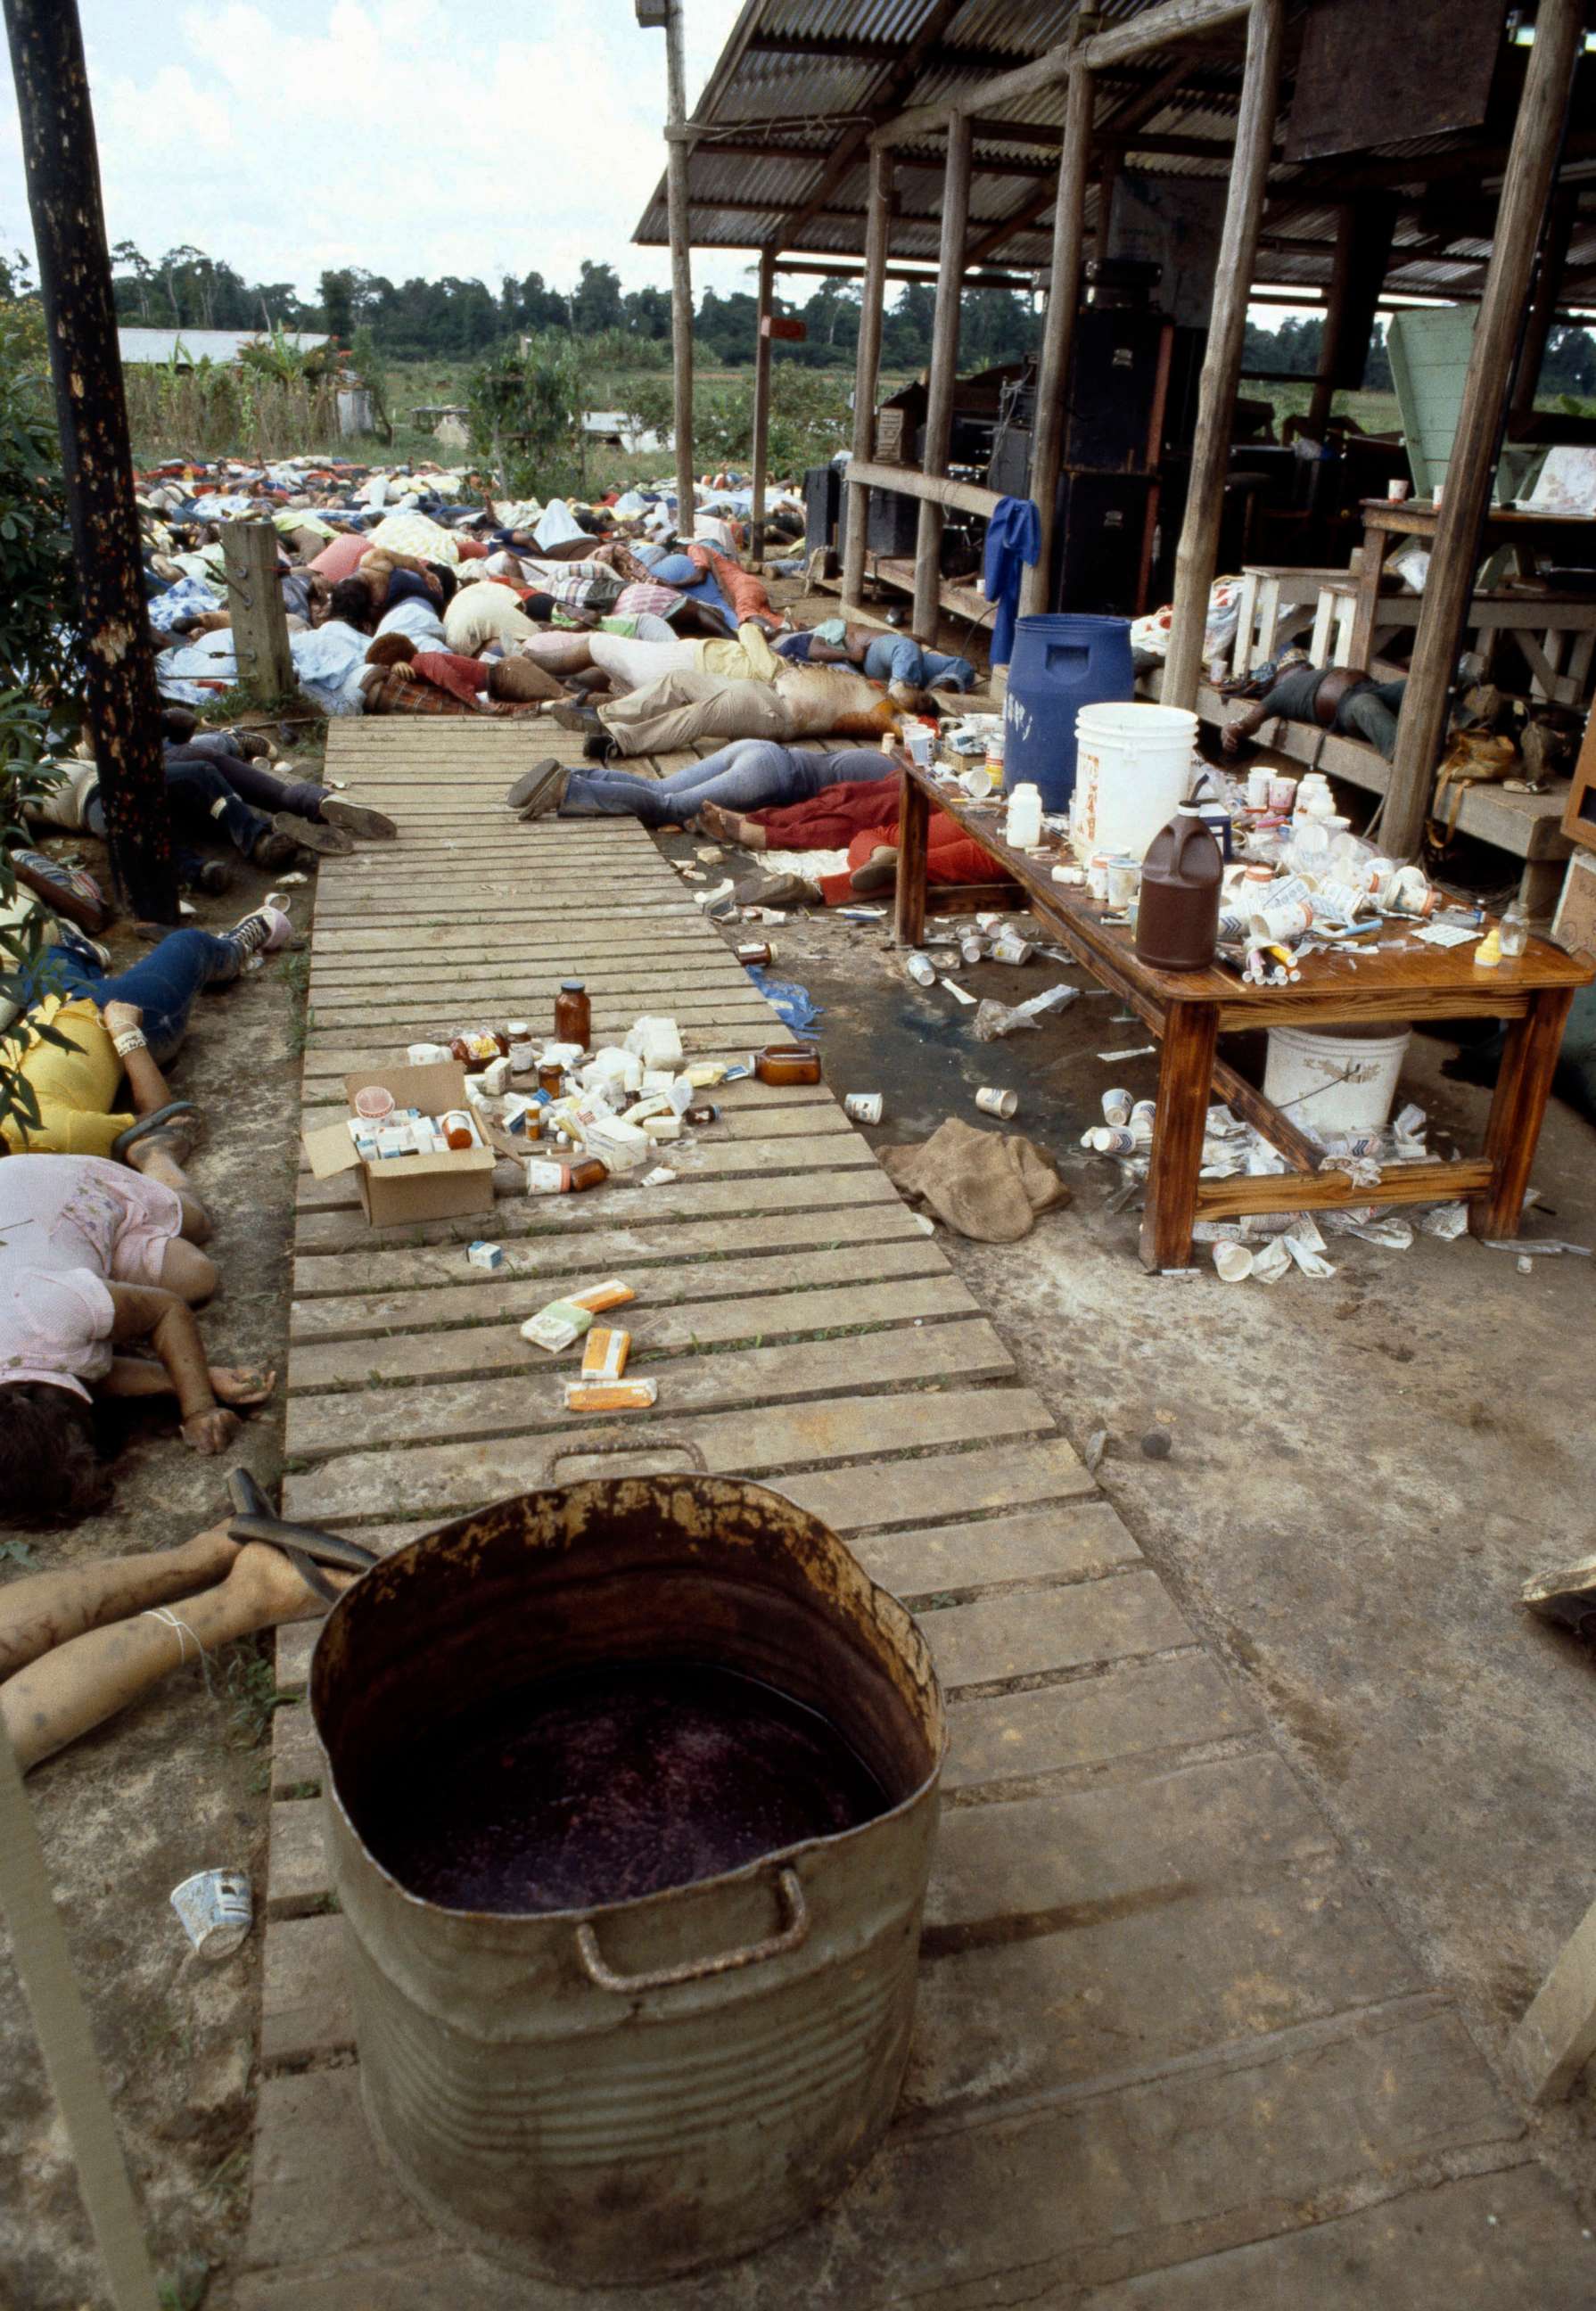 Looking Back At The Jonestown Tragedy Photos Image 51 Abc News